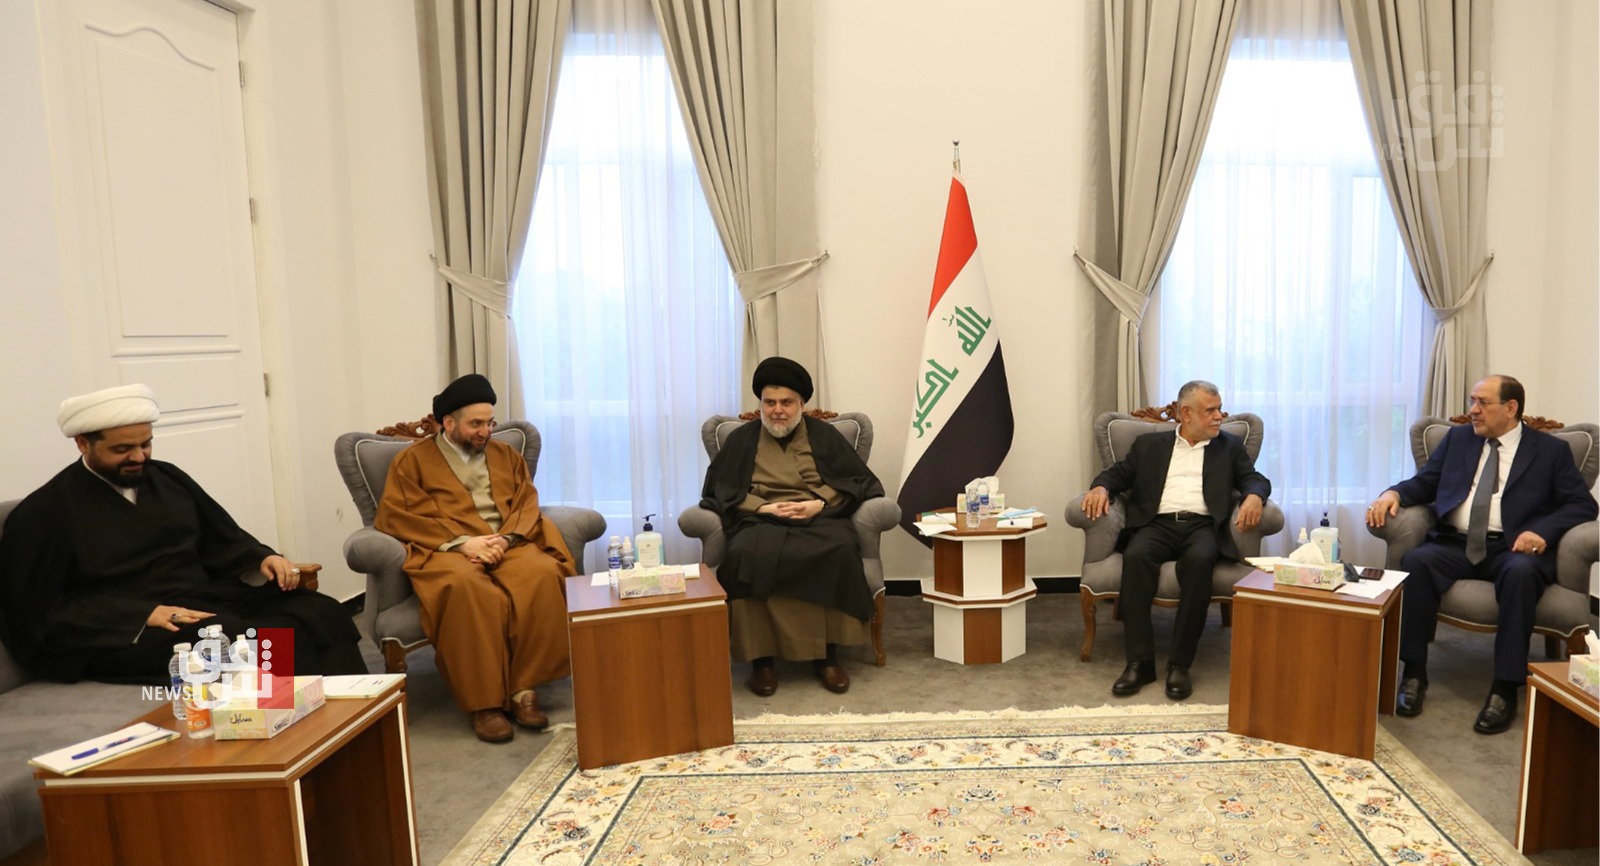 Coordination Framework and al-Sadr hit on some common ground: unity of Shiite component comes first